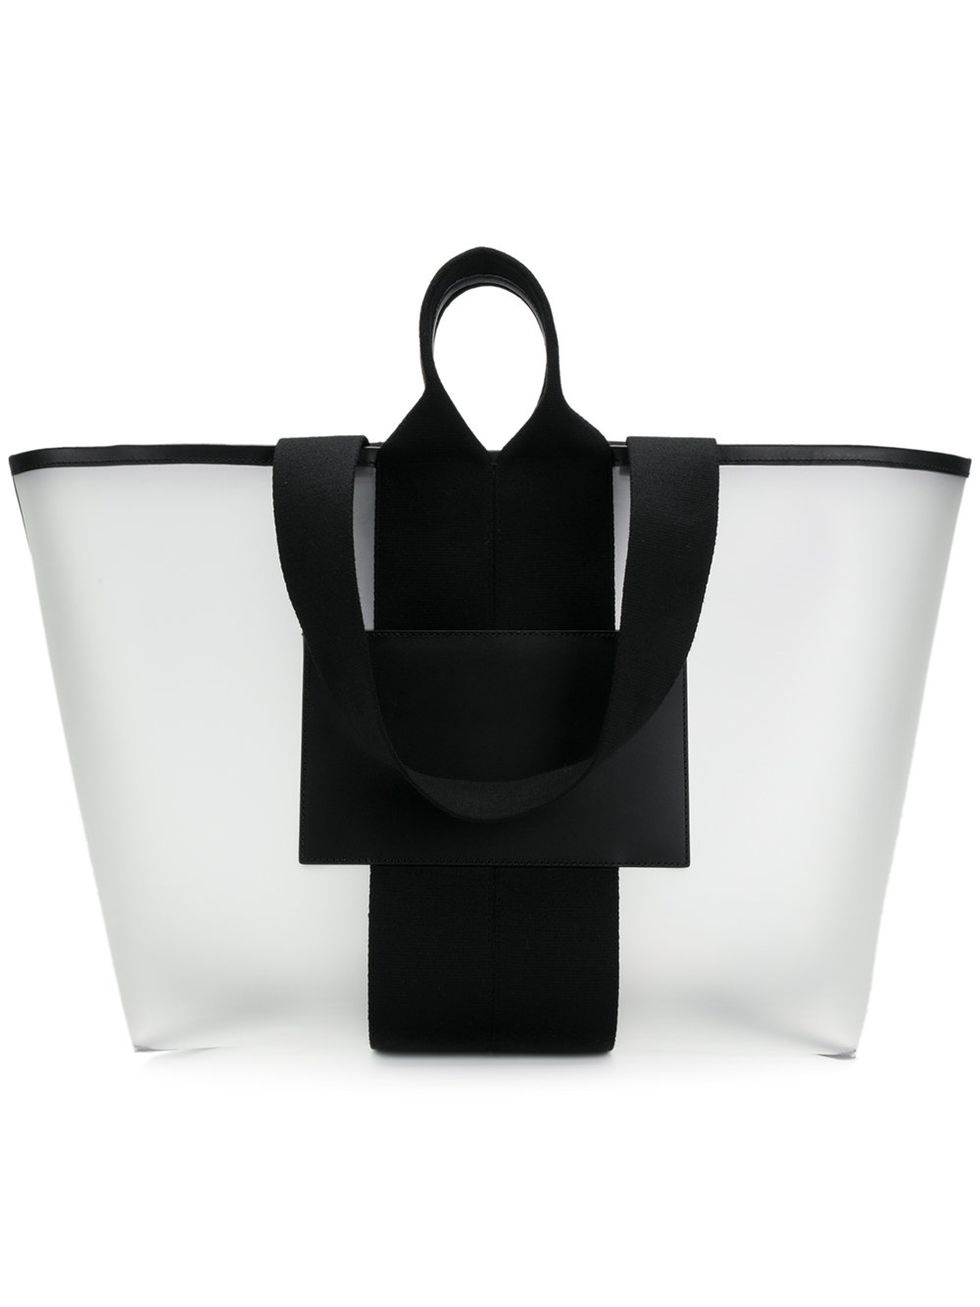 Bag, White, Black, Handbag, Product, Fashion accessory, Luggage and bags, Tote bag, Black-and-white, Leather, 